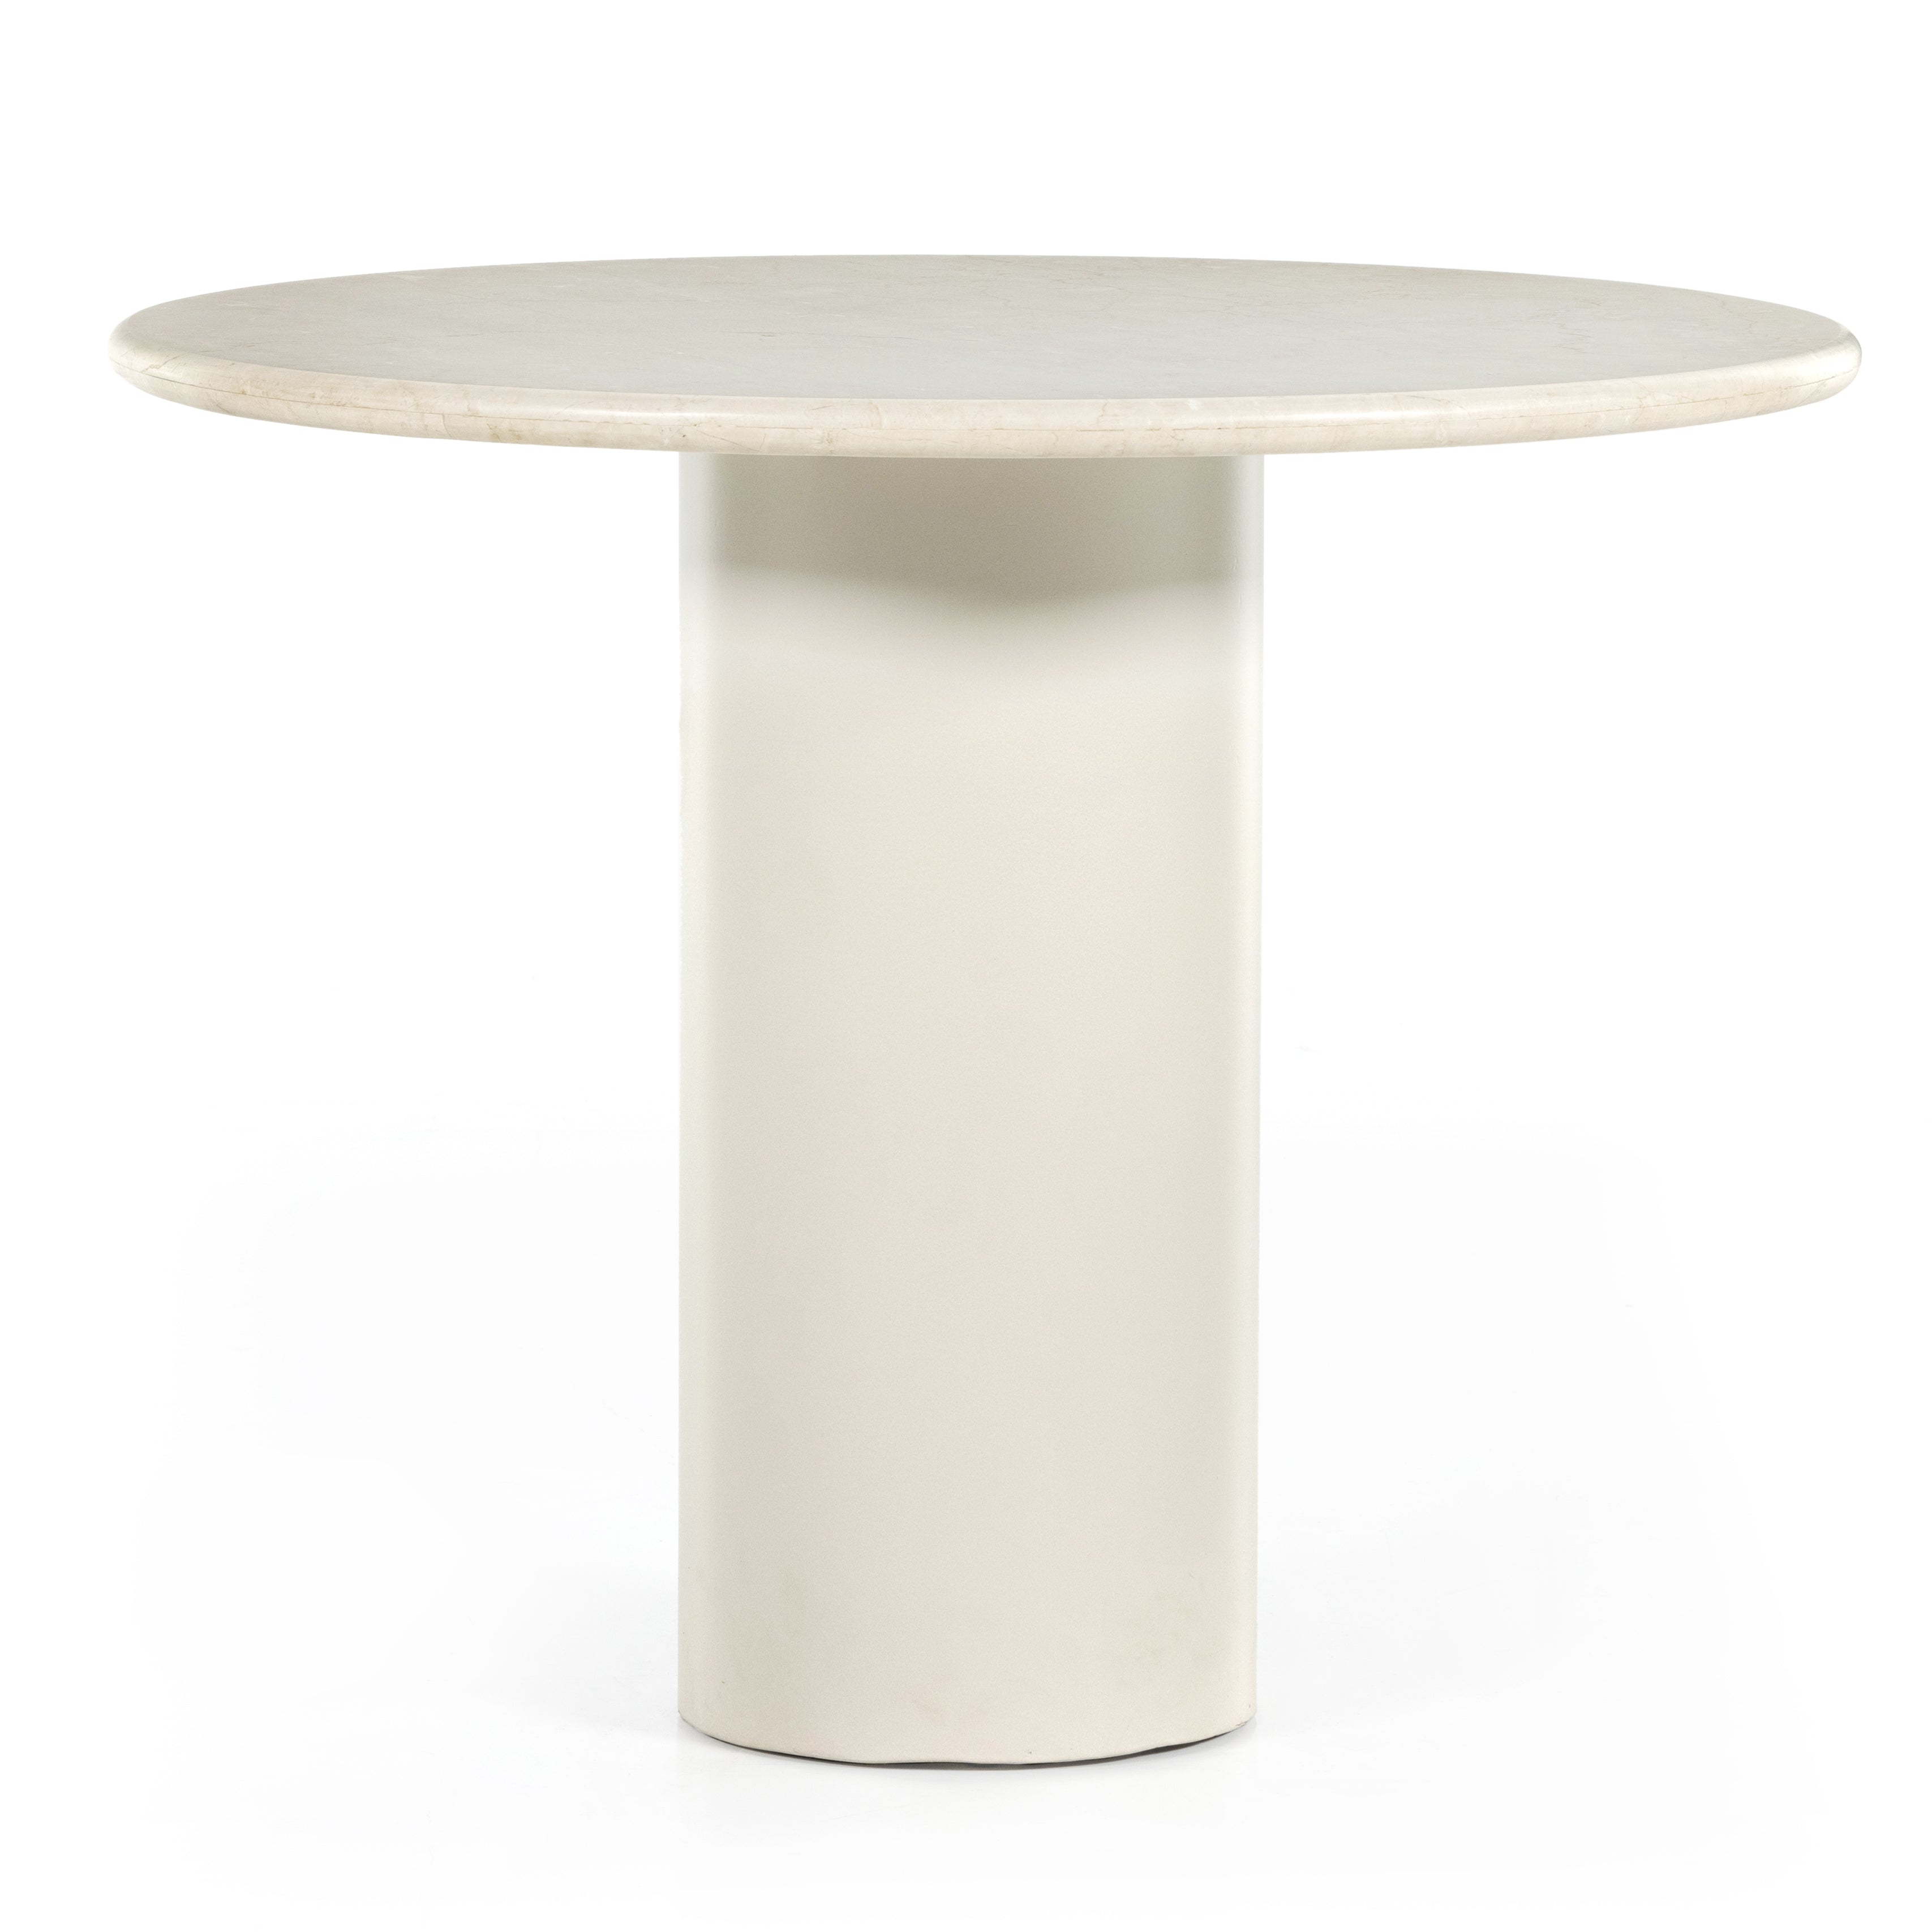 Cormac Round Dining Table